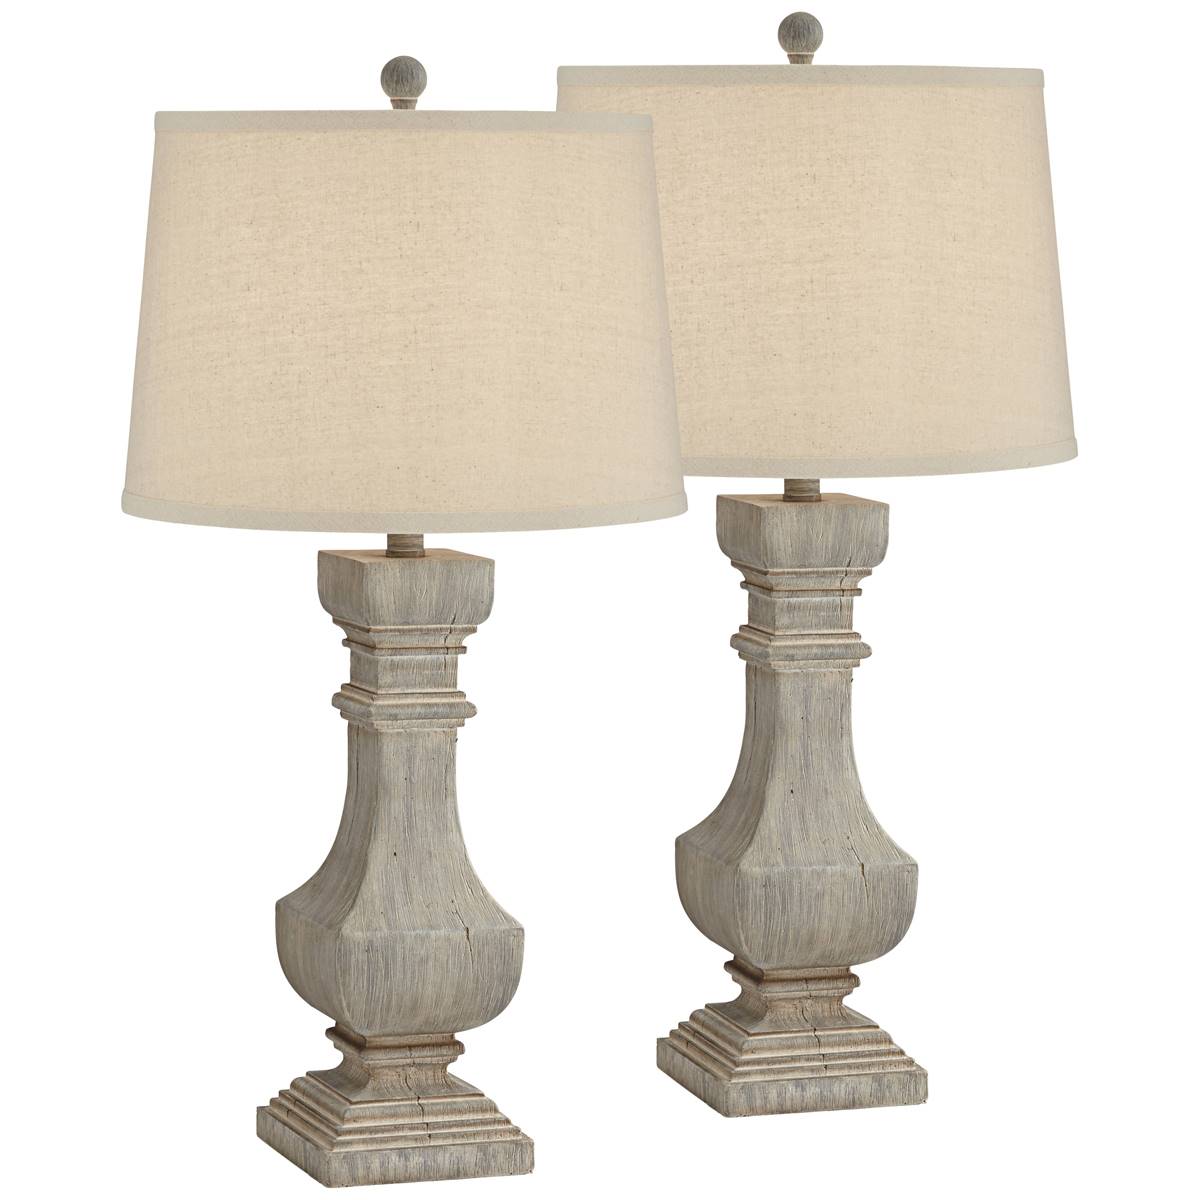 Pacific Coast Lighting Set Of 2 Wilmington Table Lamps